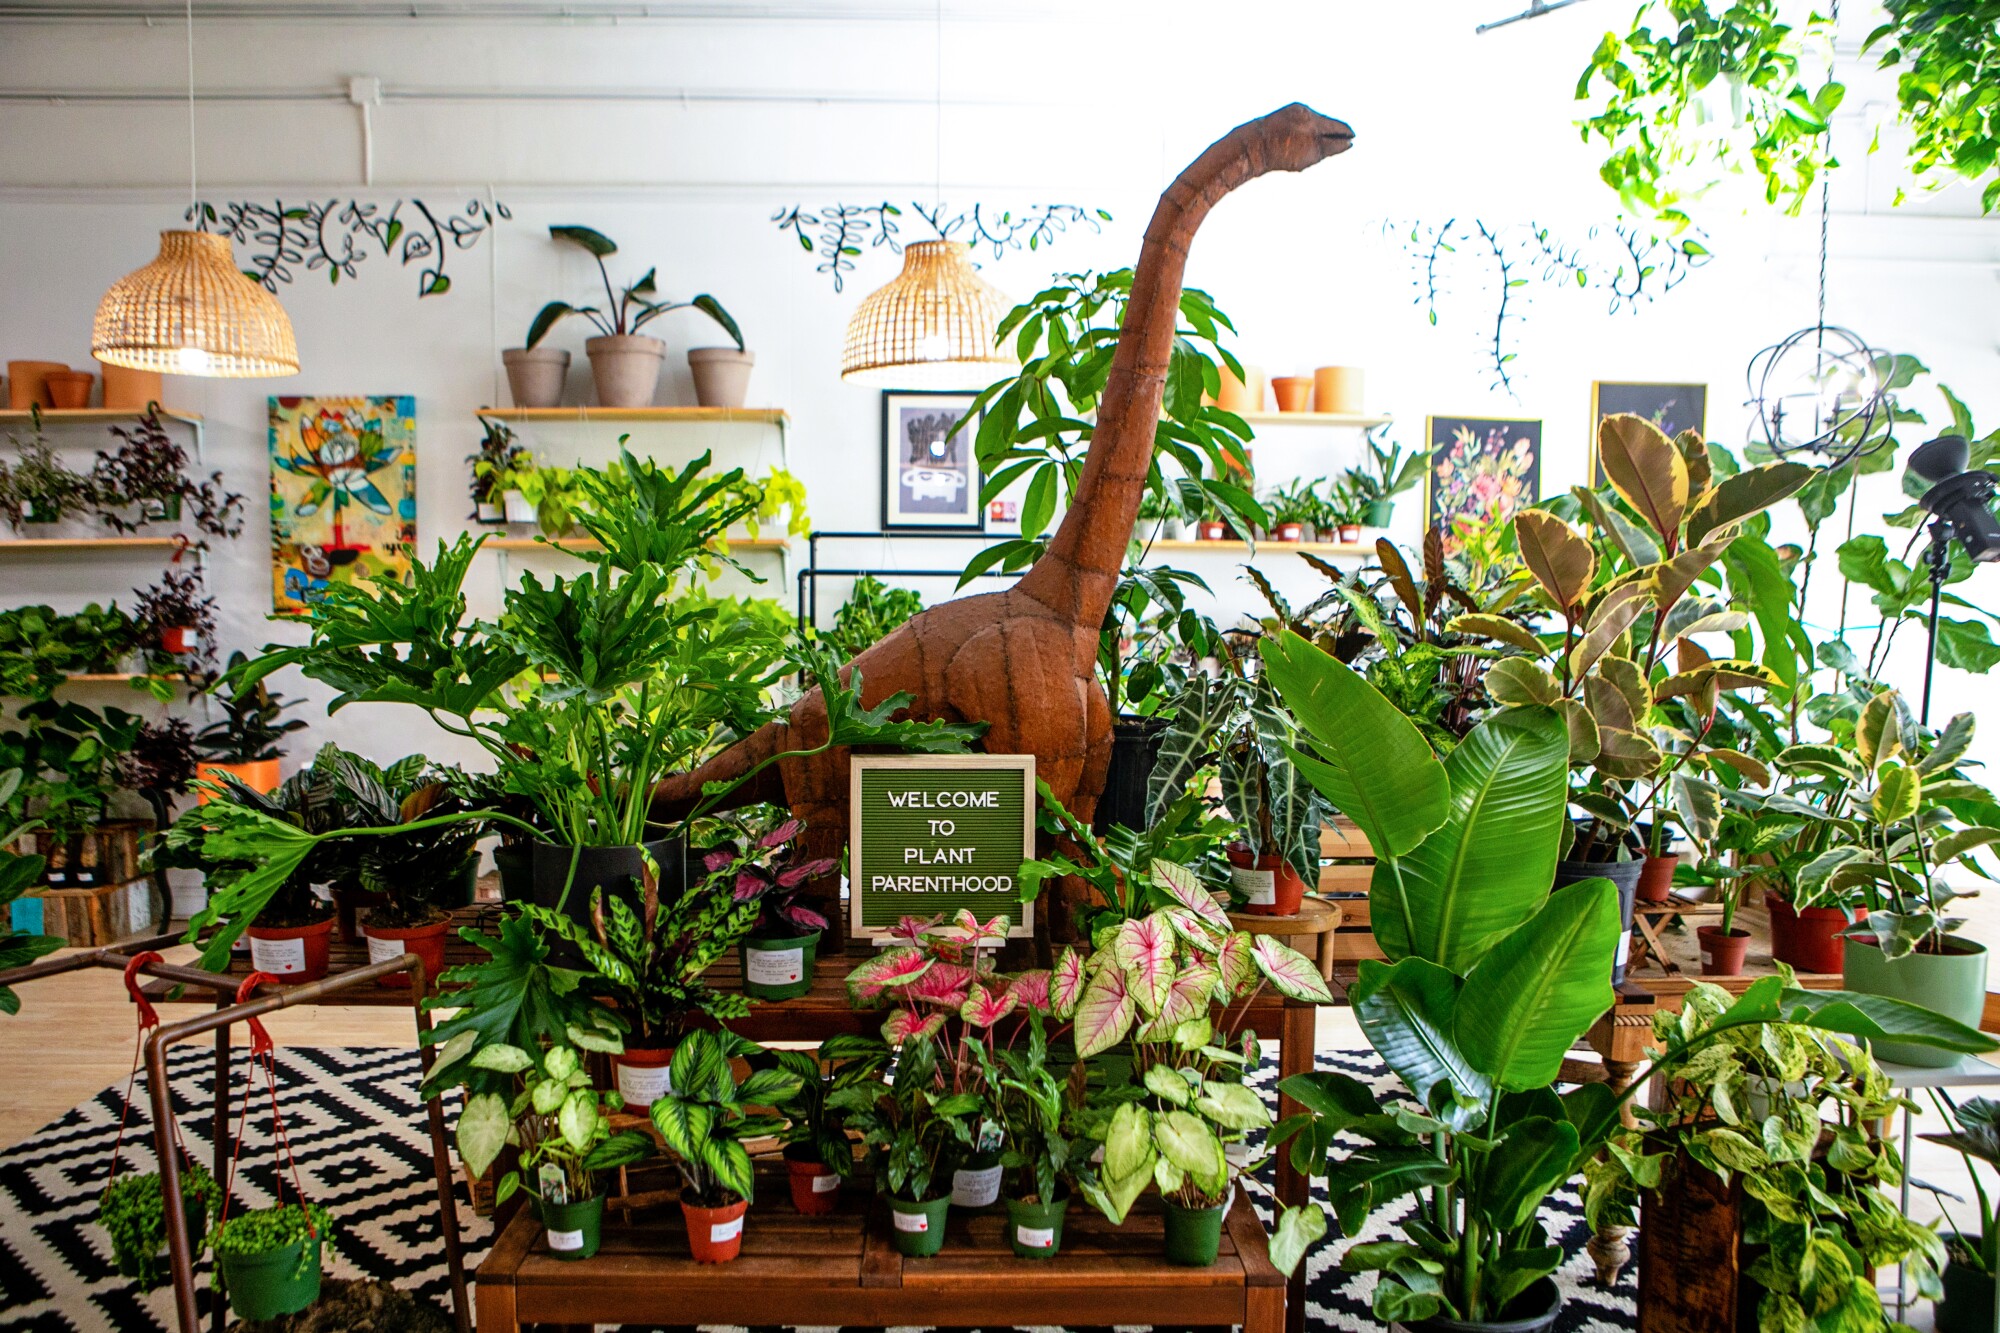 A Brachiosaurus sculpture towers over a cluster of potted plants indoors.